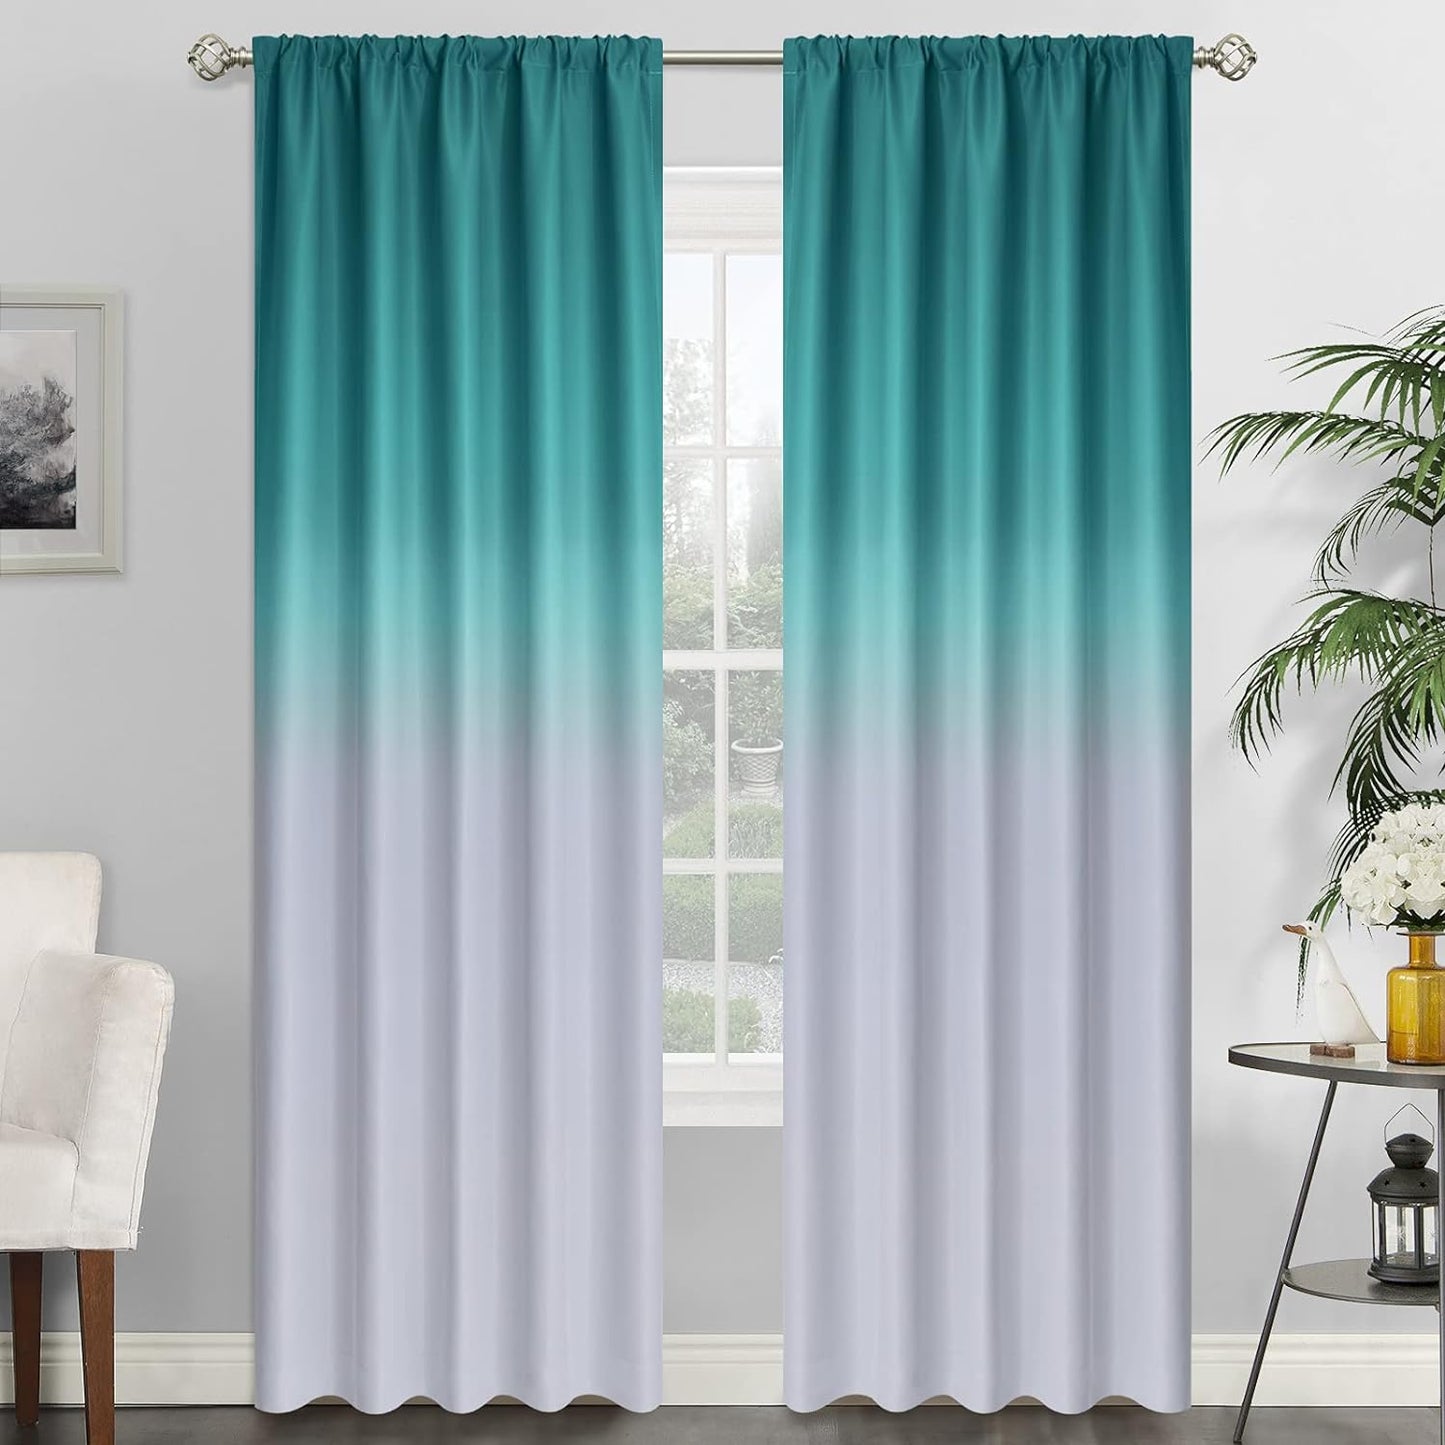 Simplehome Ombre Room Darkening Curtains for Bedroom, Light Blocking Gradient Purple to Greyish White Thermal Insulated Rod Pocket Window Curtains Drapes for Living Room,2 Panels, 52X84 Inches Length  SimpleHome Teal 1 52W X 84L / 2 Panels 